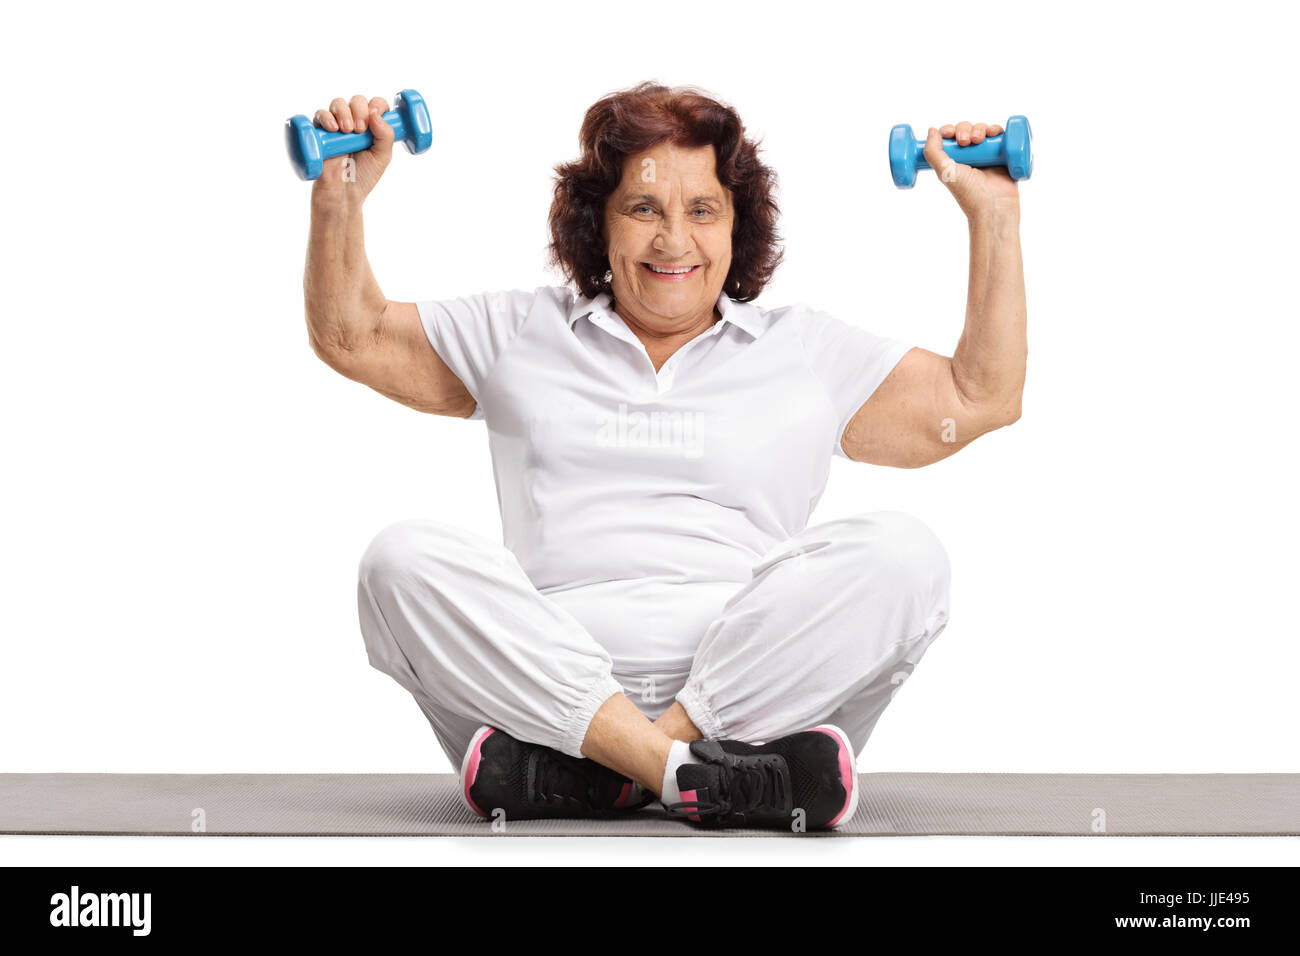 Elderly woman lifting dumbbells on an exercise mat isolated on white background Stock Photo